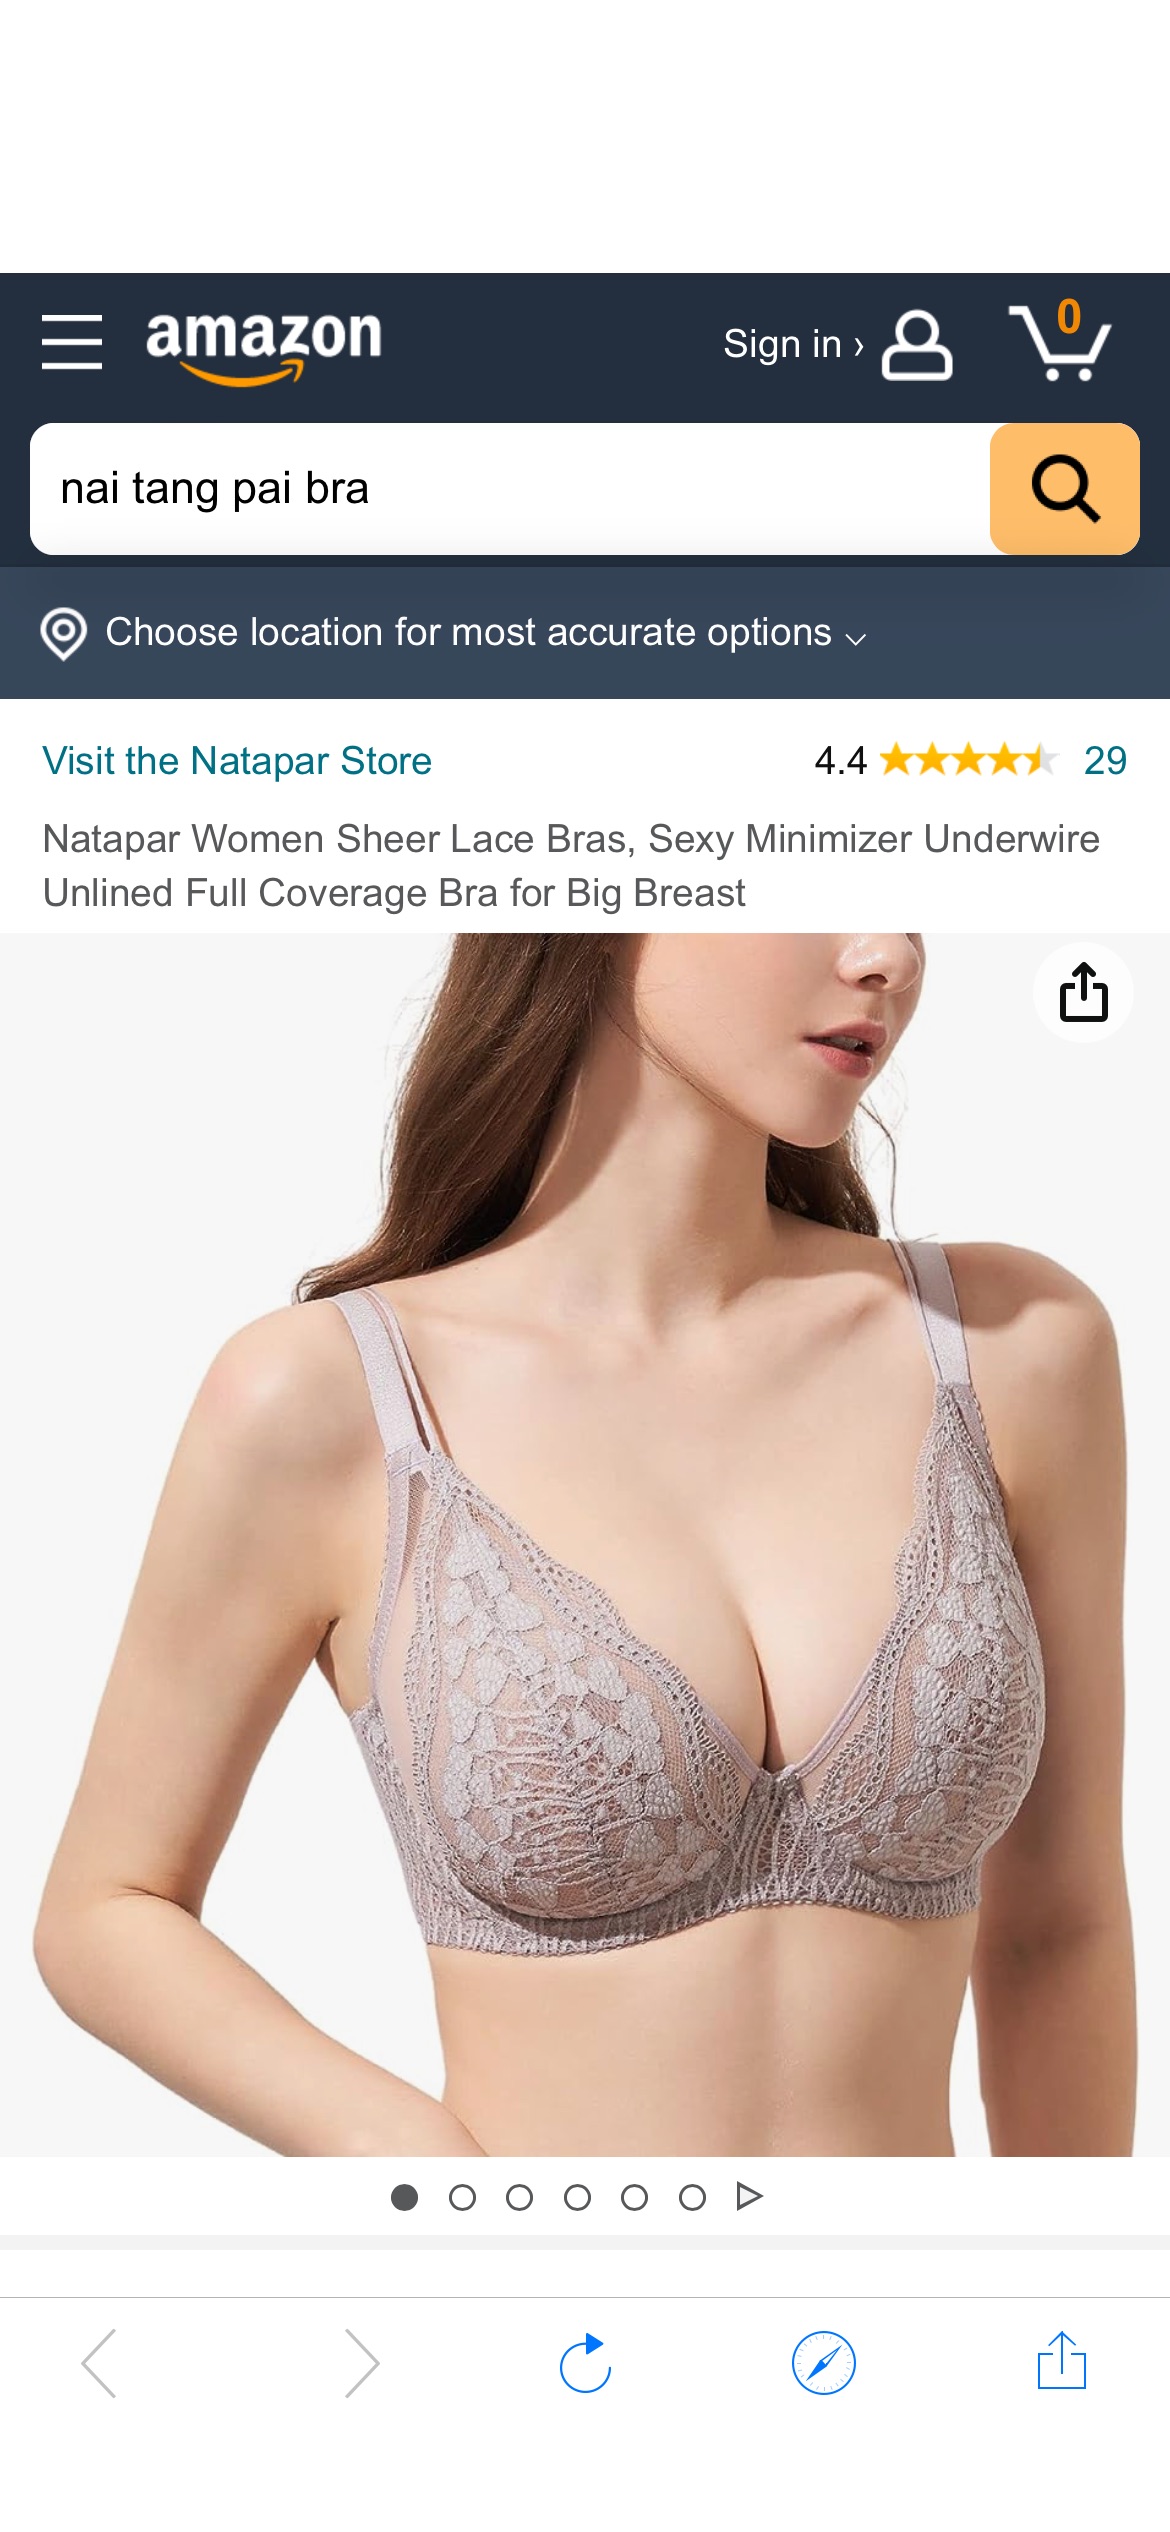 Natapar Women Sheer Lace Bras, Sexy Minimizer Underwire Unlined Full Coverage Bra for Big Breast Purple Grey at Amazon Women’s Clothing store奶糖派